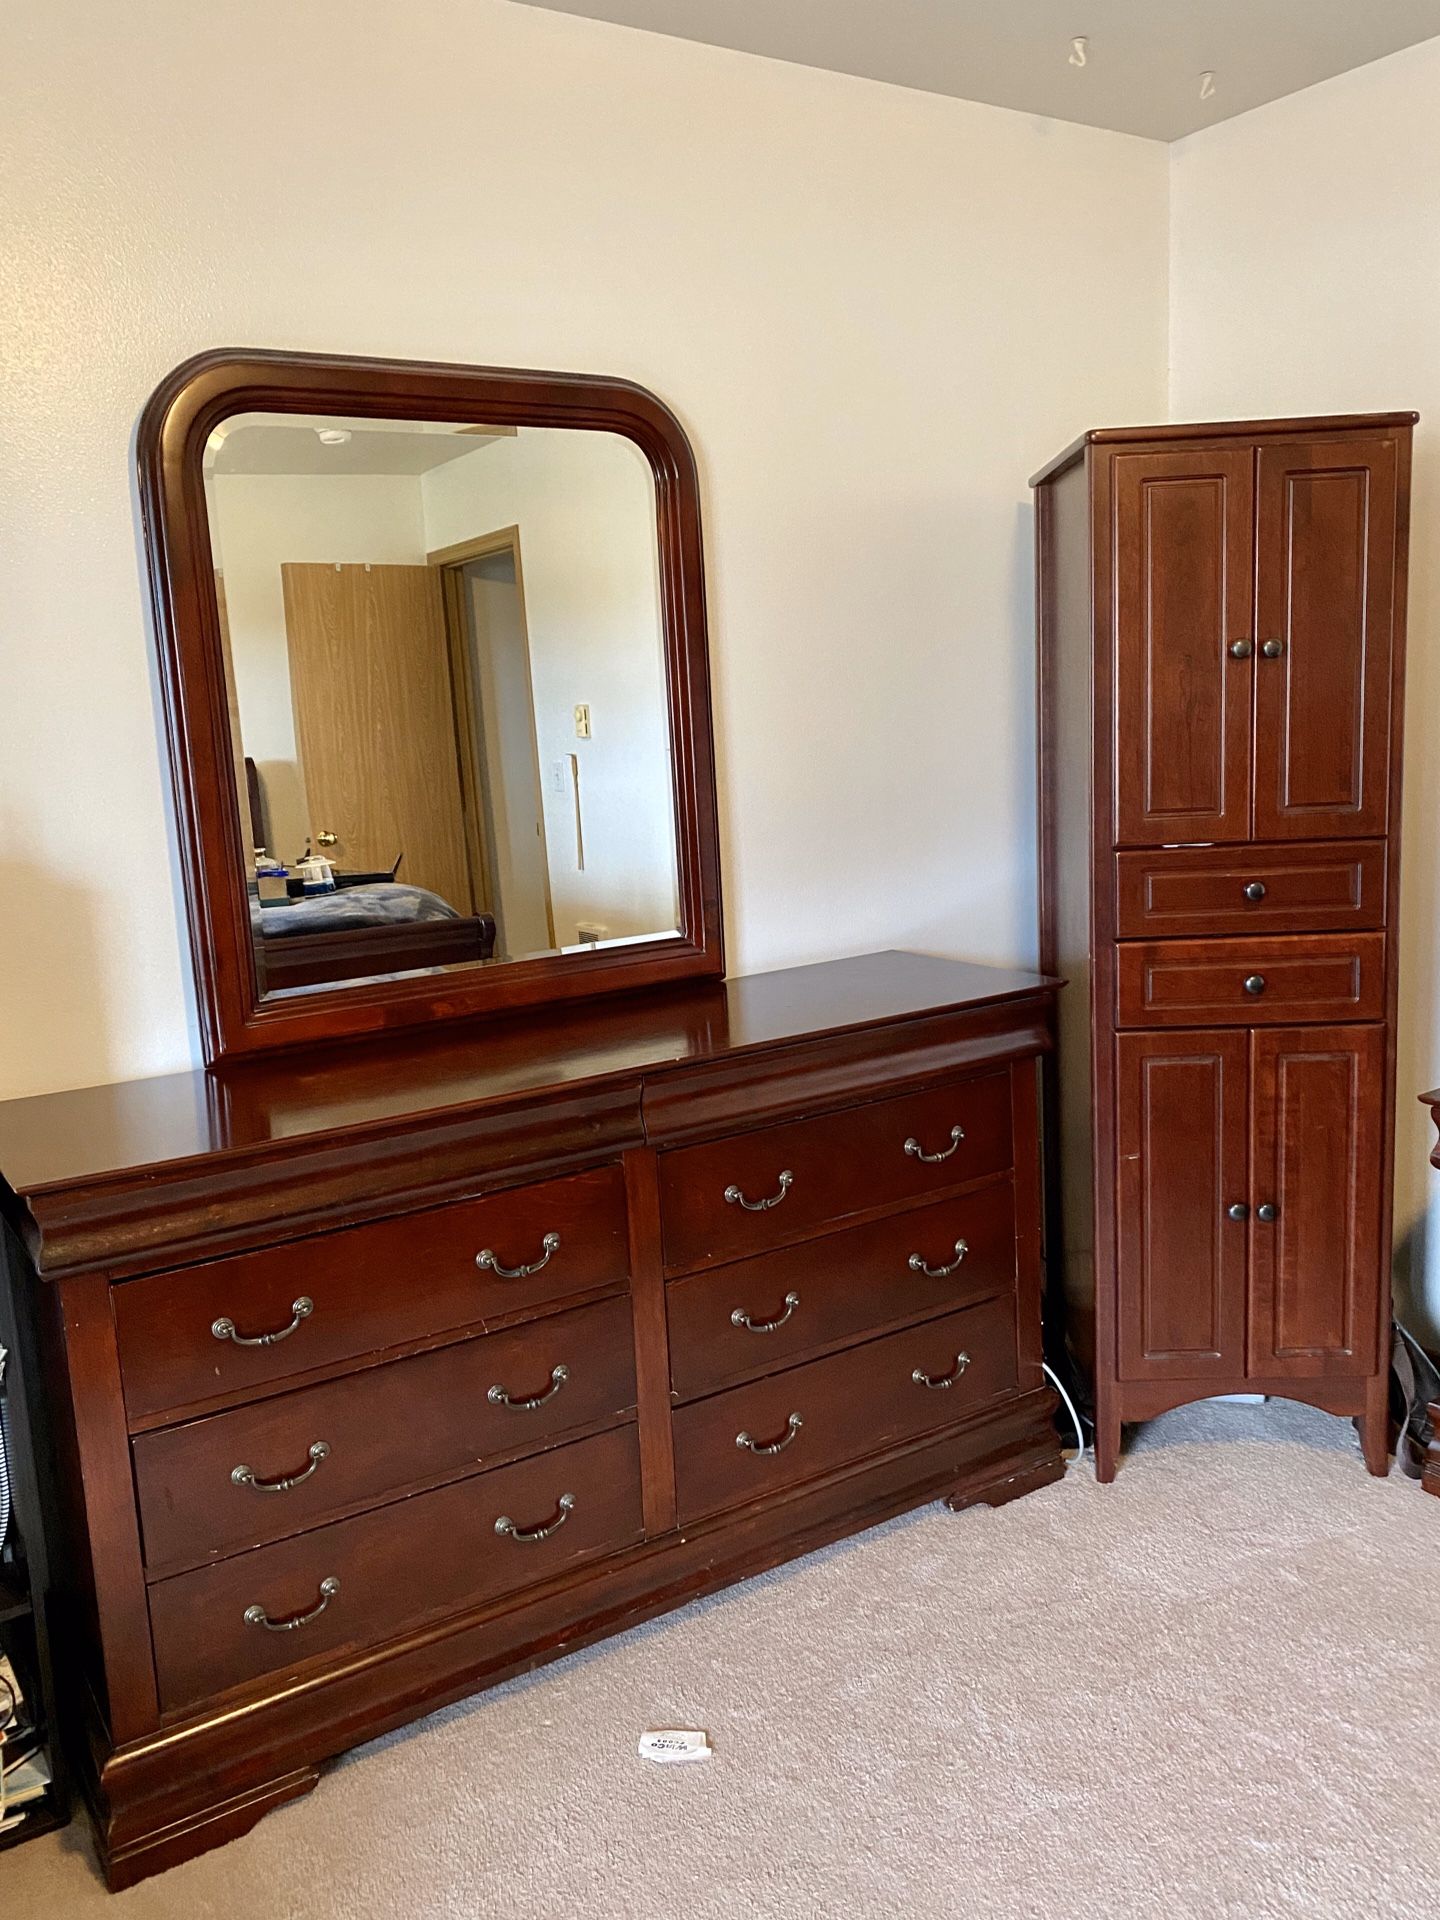 Cherry wood dresser with mirror with 8 drawers and tall cherry wood tall cabinet